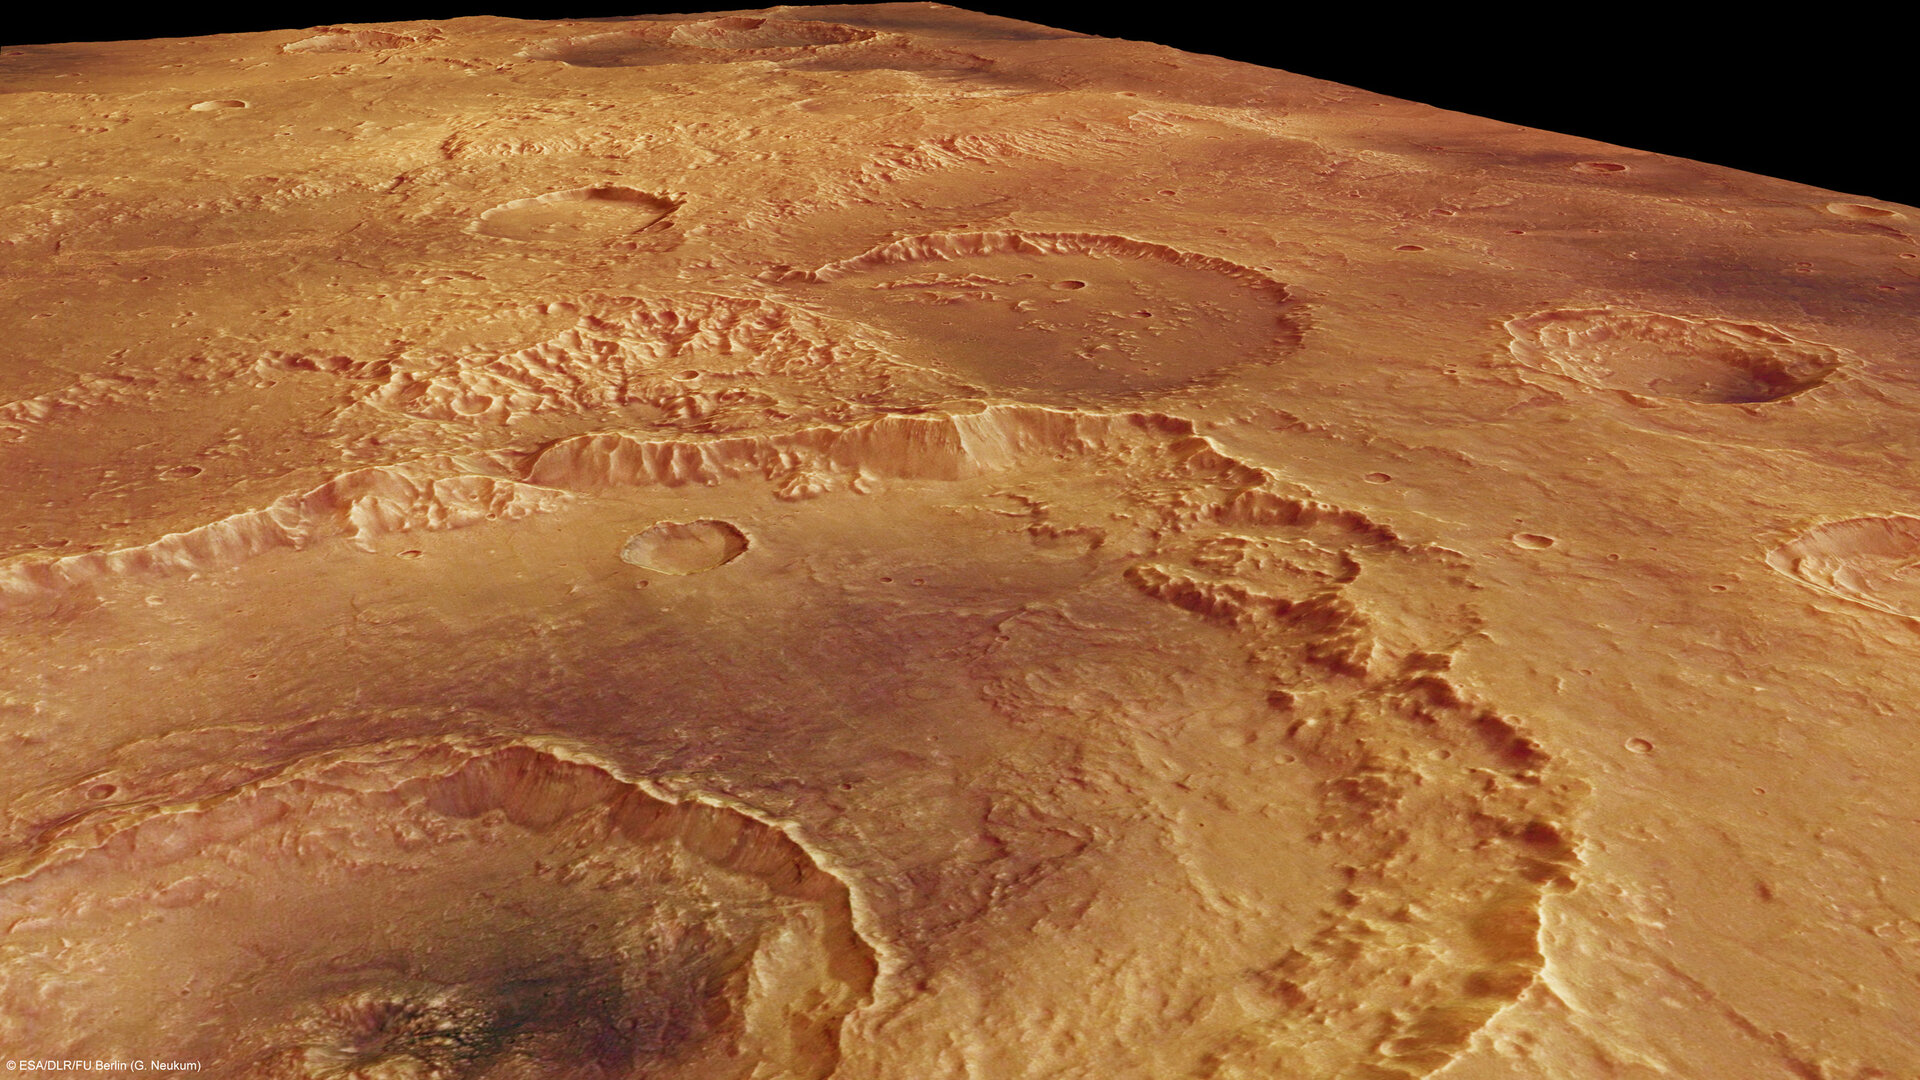 Perspective view of Sirenum Fossae in the Southern Highlands of Mars.